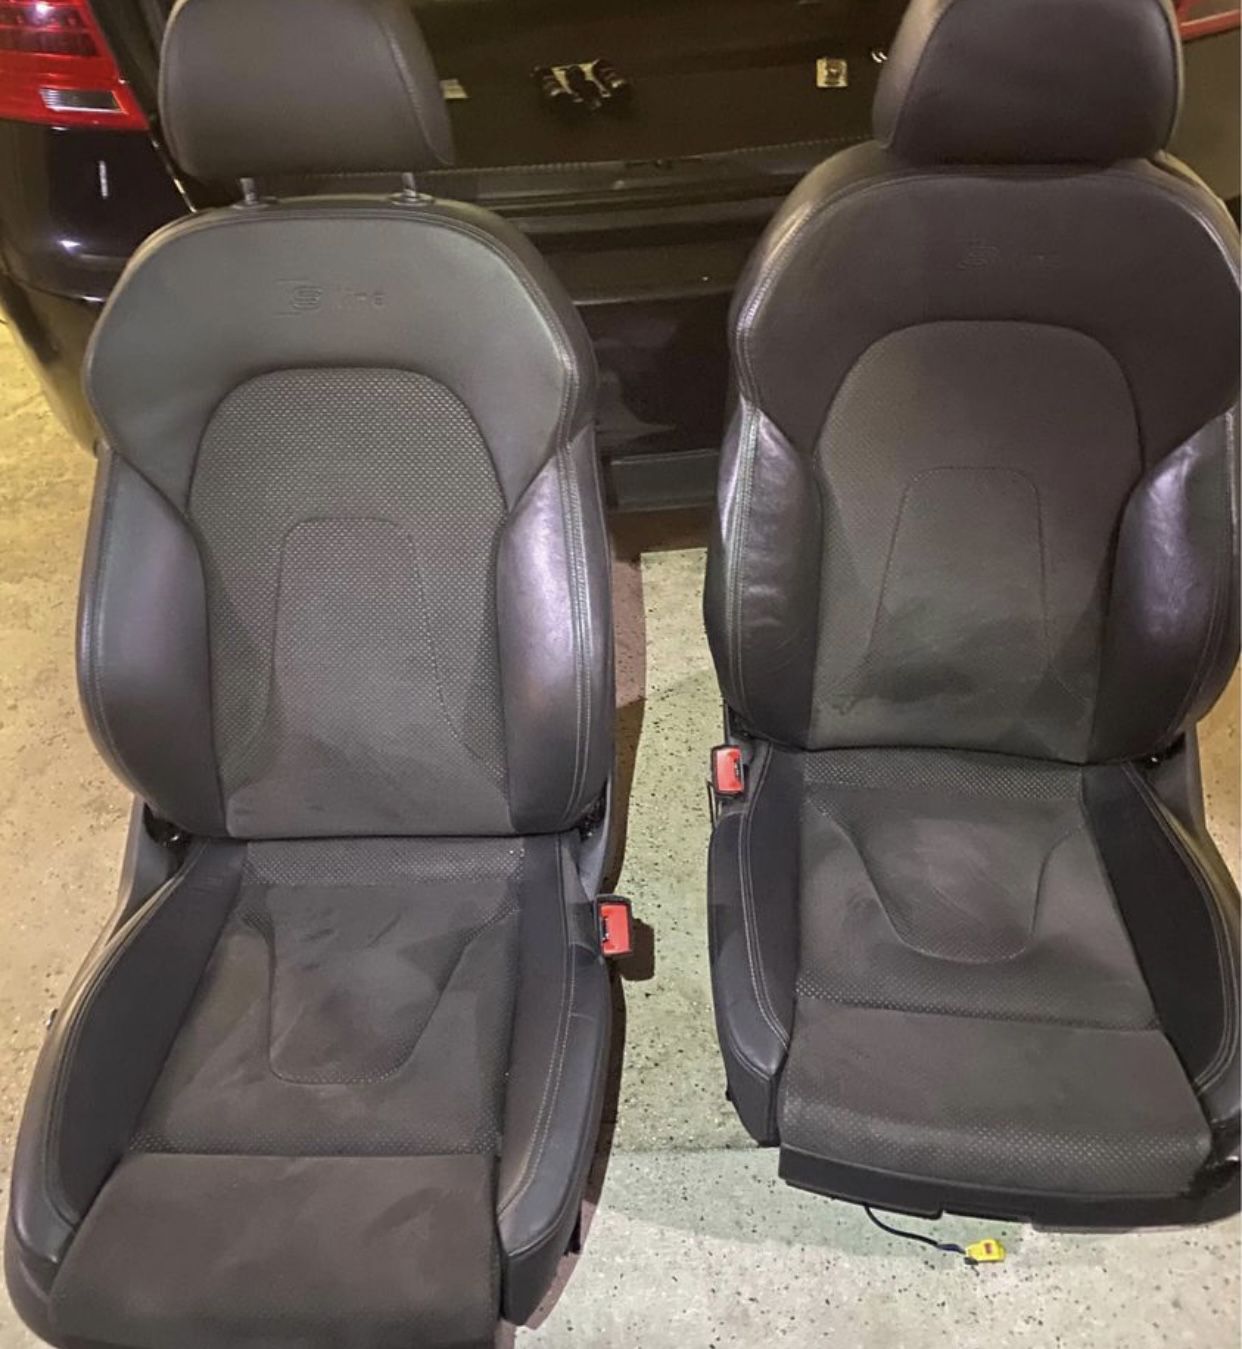 Audi S-line Seats Front And Back